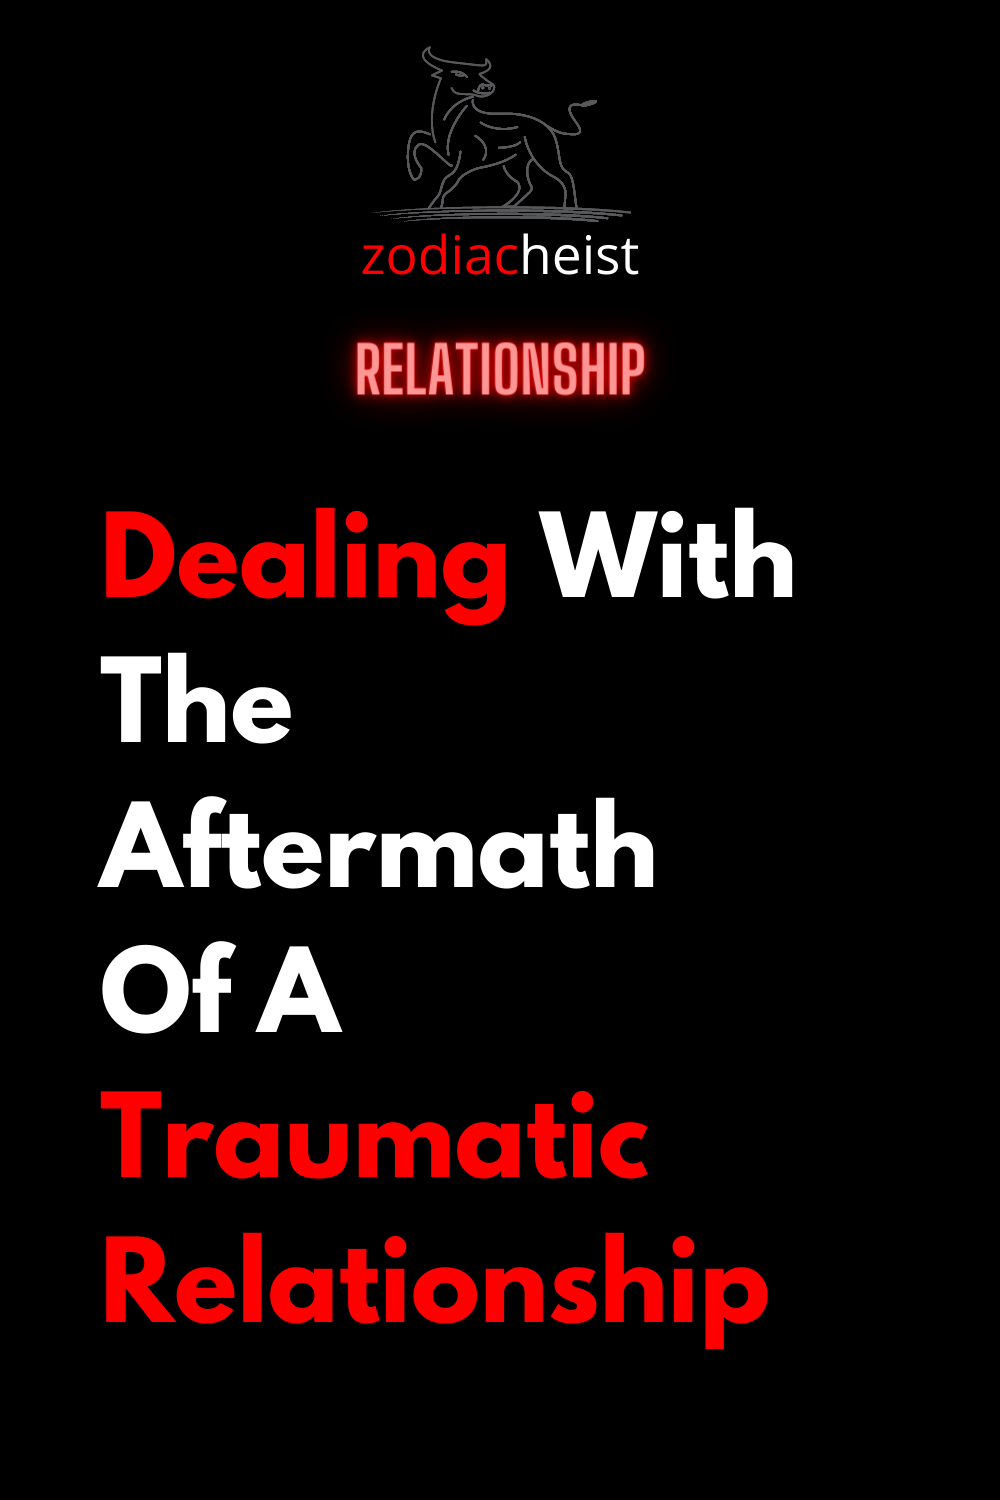 Dealing With The Aftermath Of A Traumatic Relationship